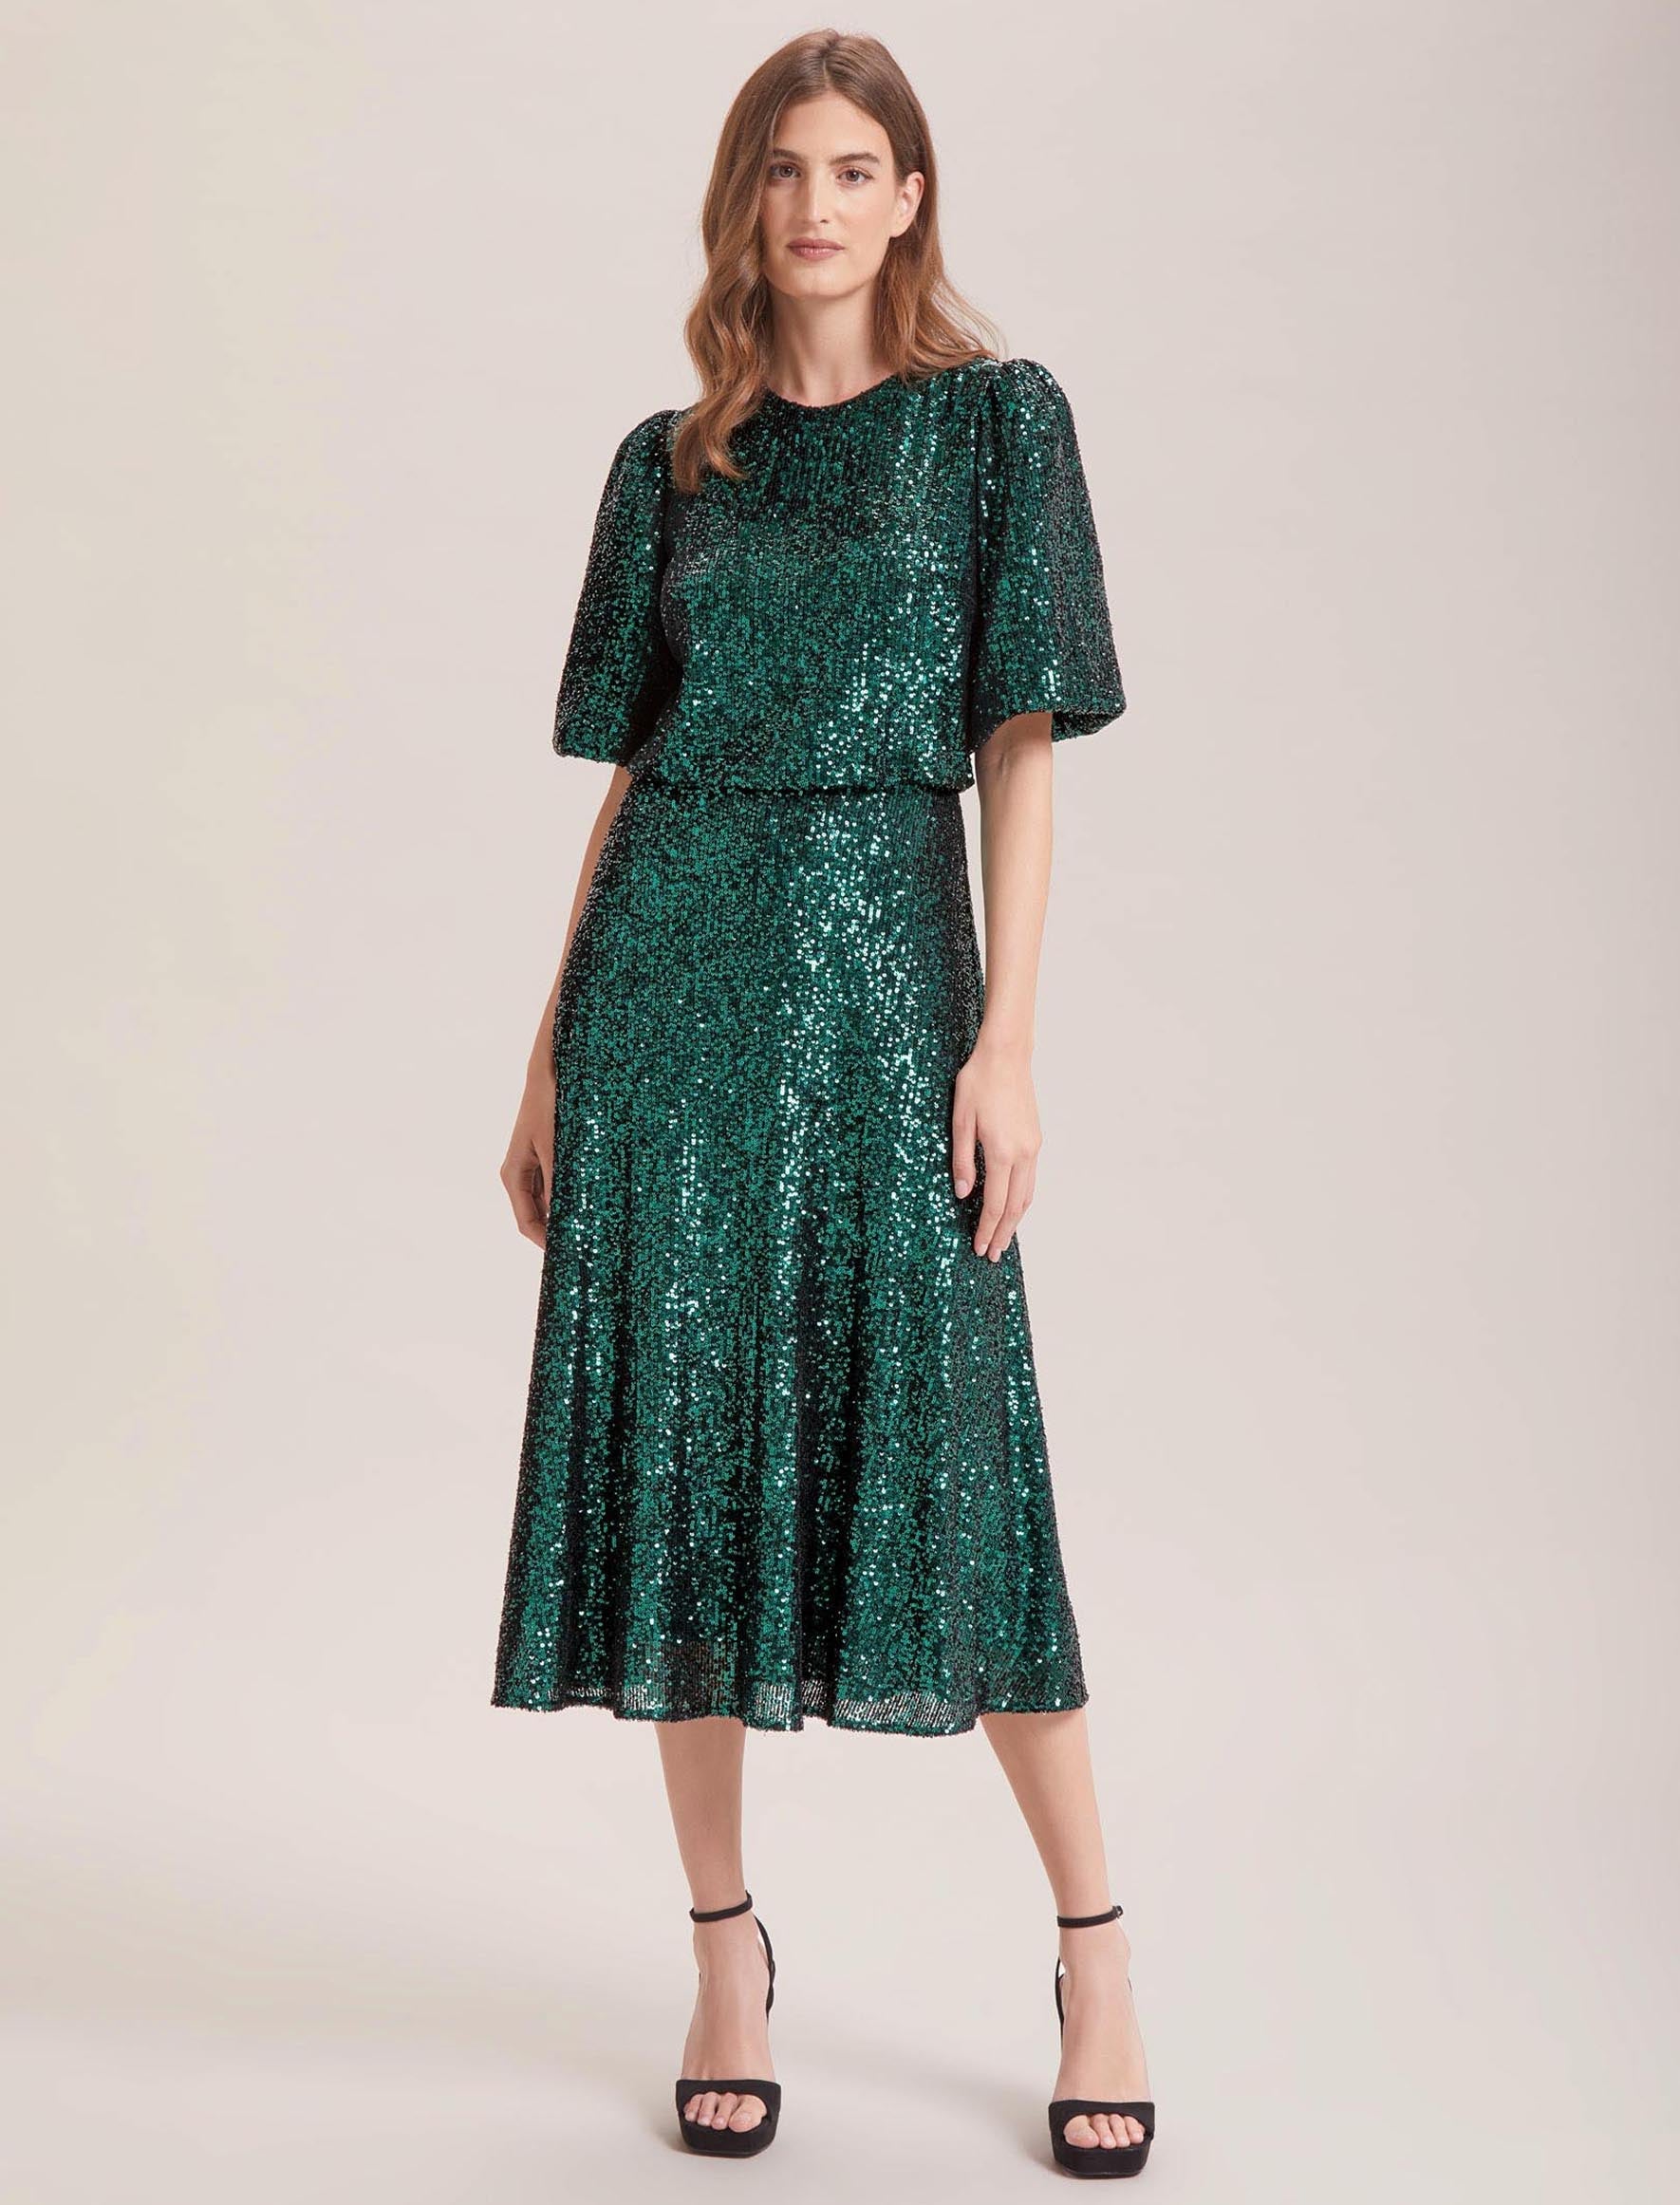 COS - Green to be seen. Discover our sculpted midi dress, finished in a  deep emerald hue.​ Discover dresses